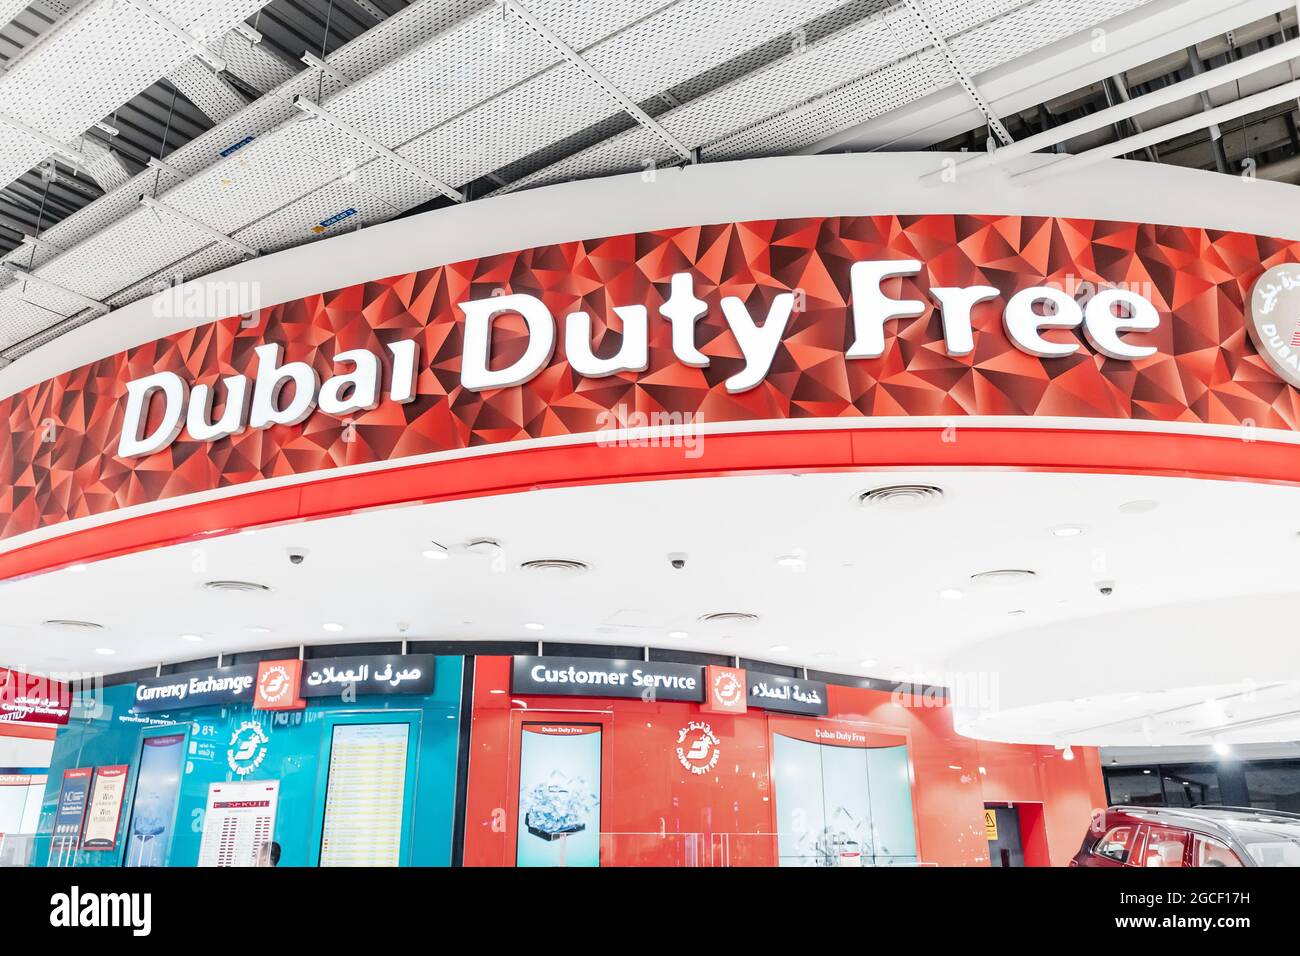 26 February 2021, Dubai, UAE: Duty Free retail shop signage in airport before gates. Commercial business in departure terminal Stock Photo